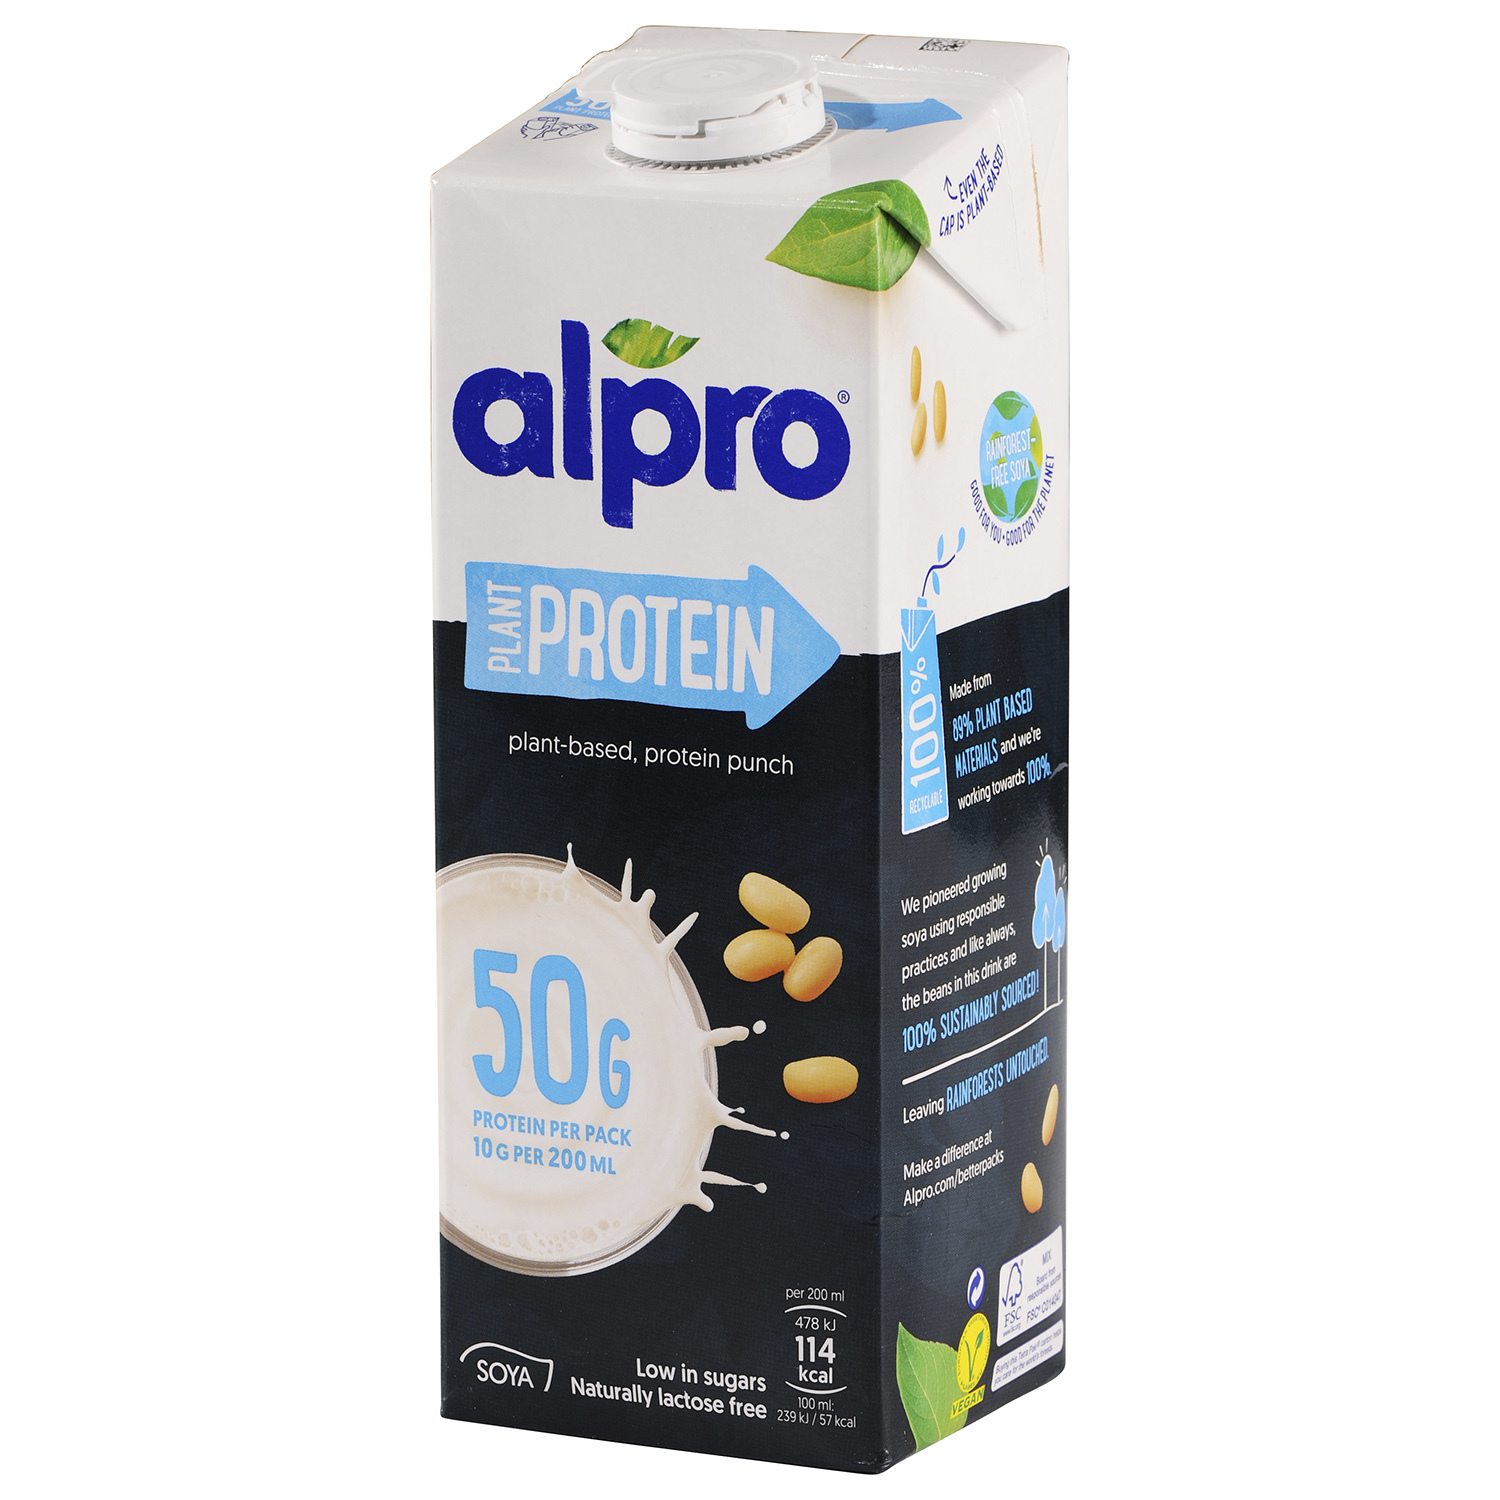 Alpro Packed with Protein Soya 1L, Milk